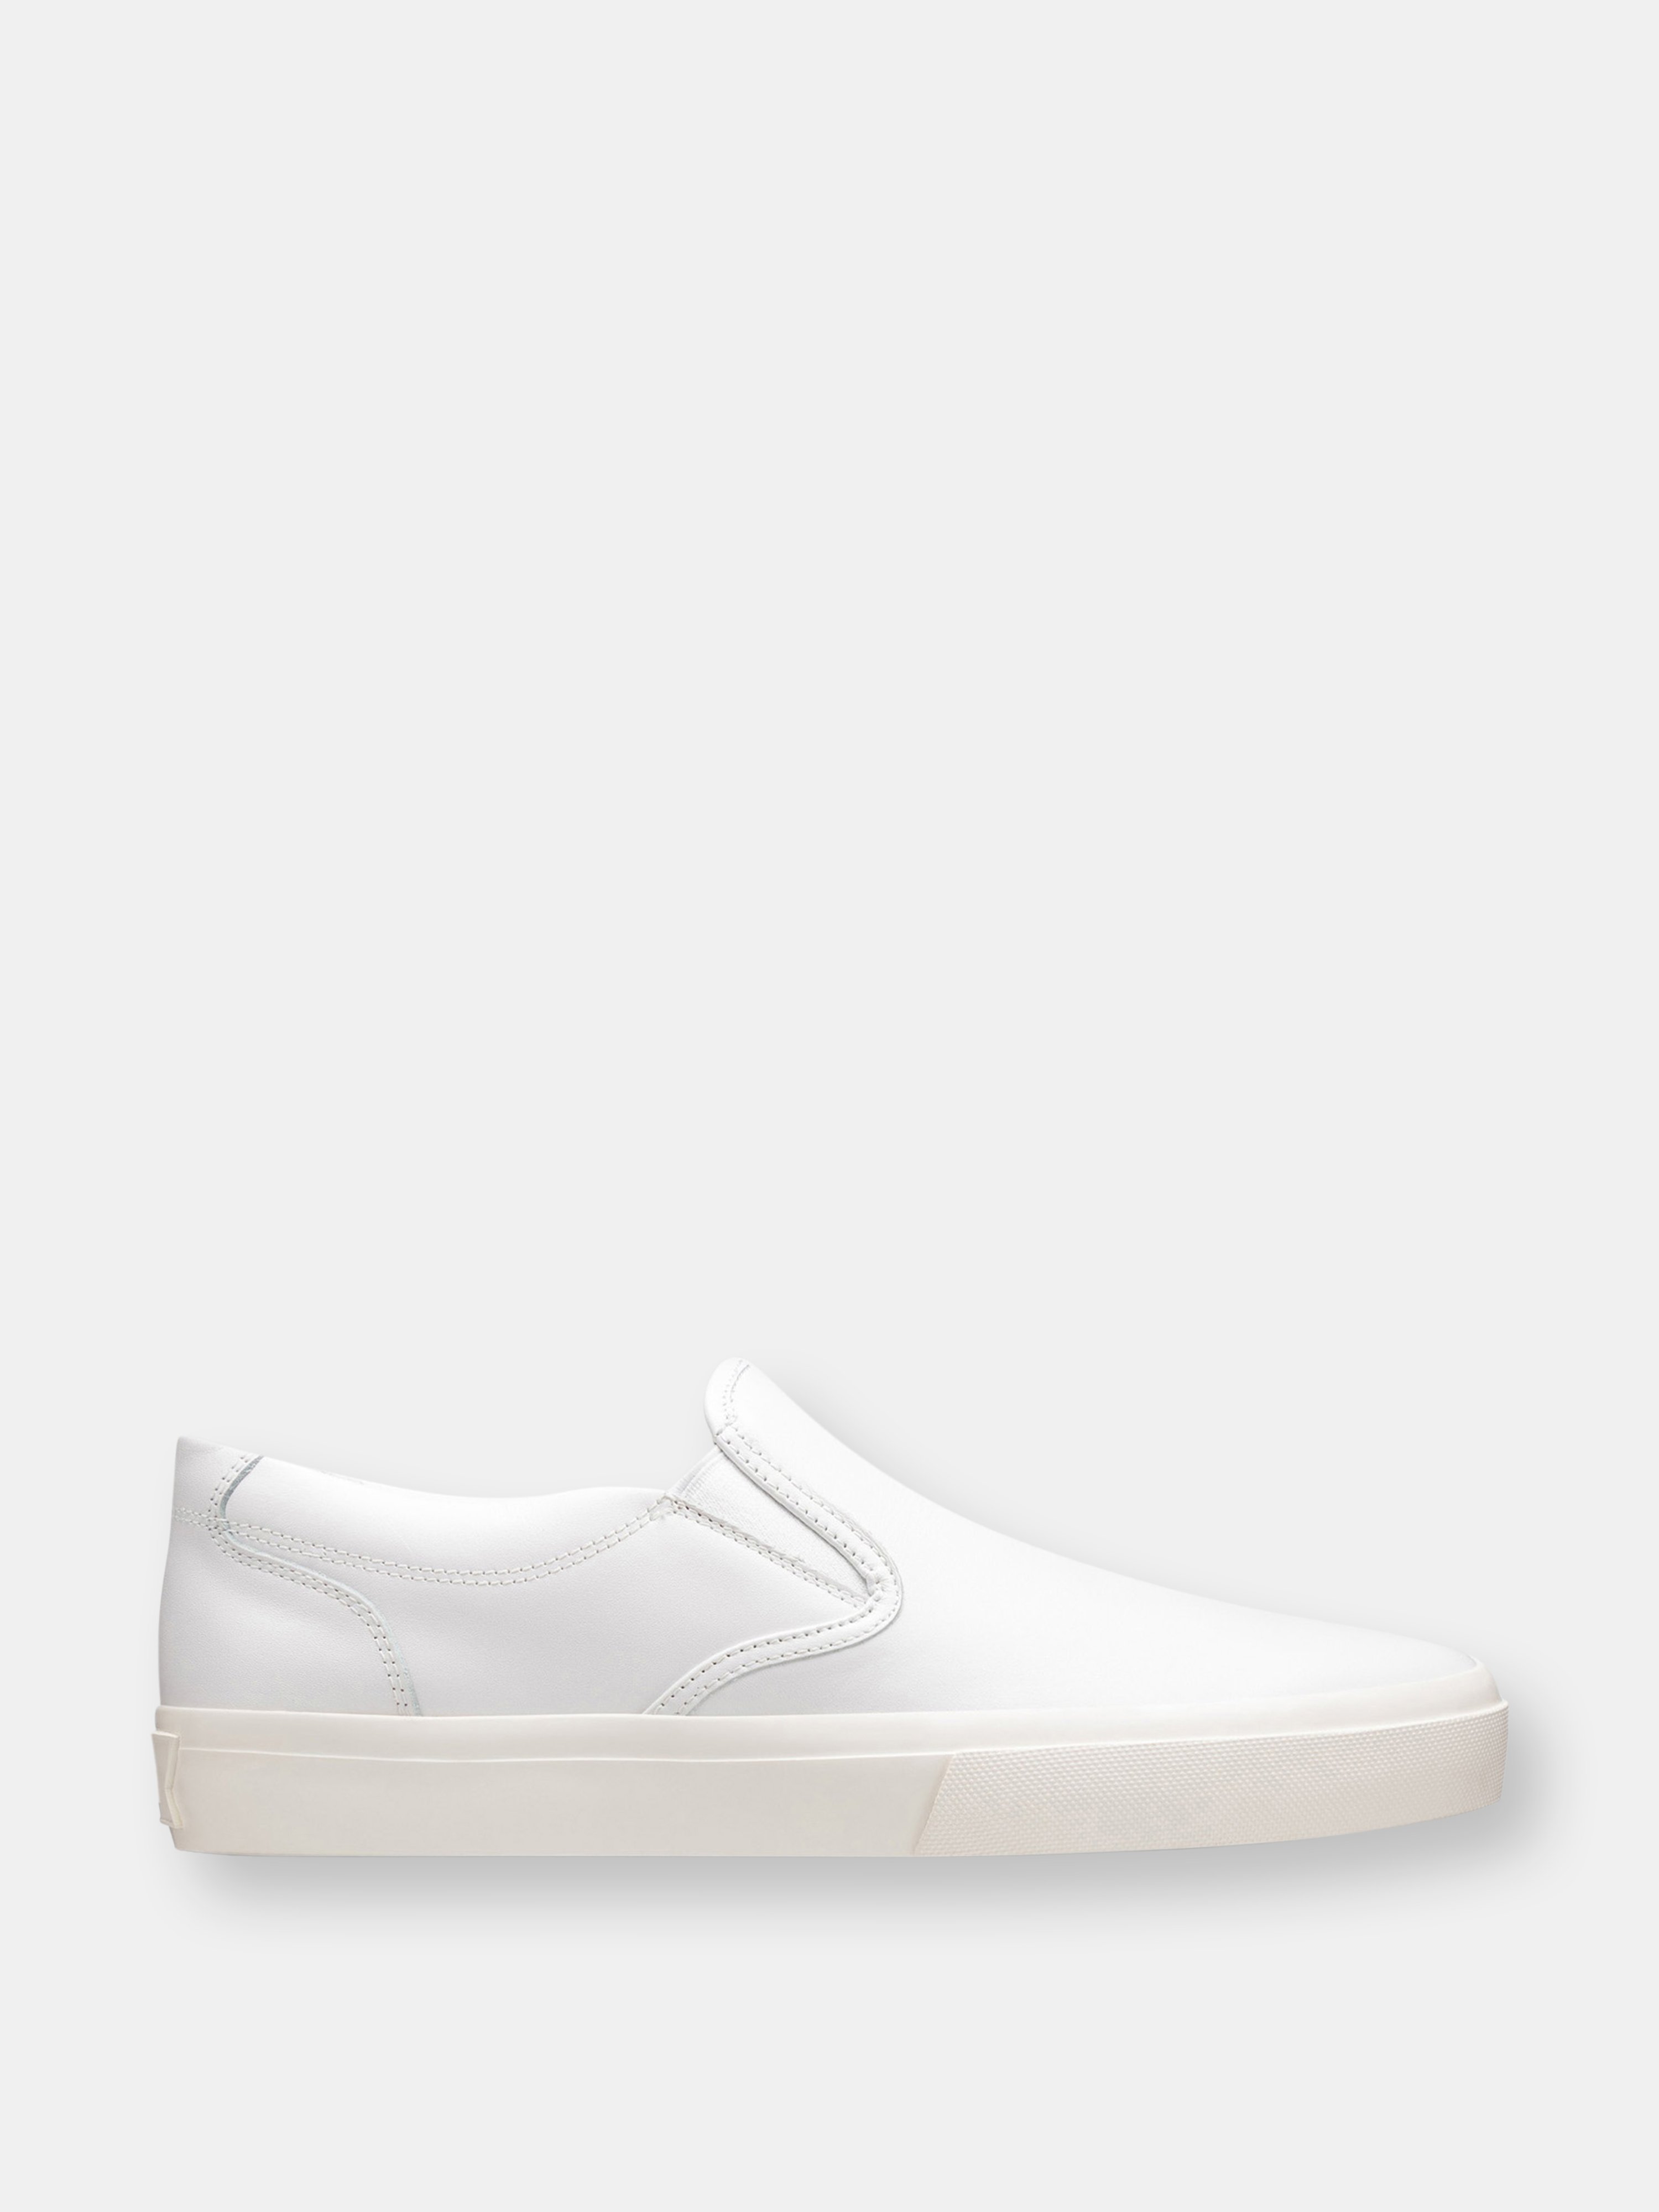 GREATS BRAND GREATS THE WOOSTER LEATHER SNEAKER